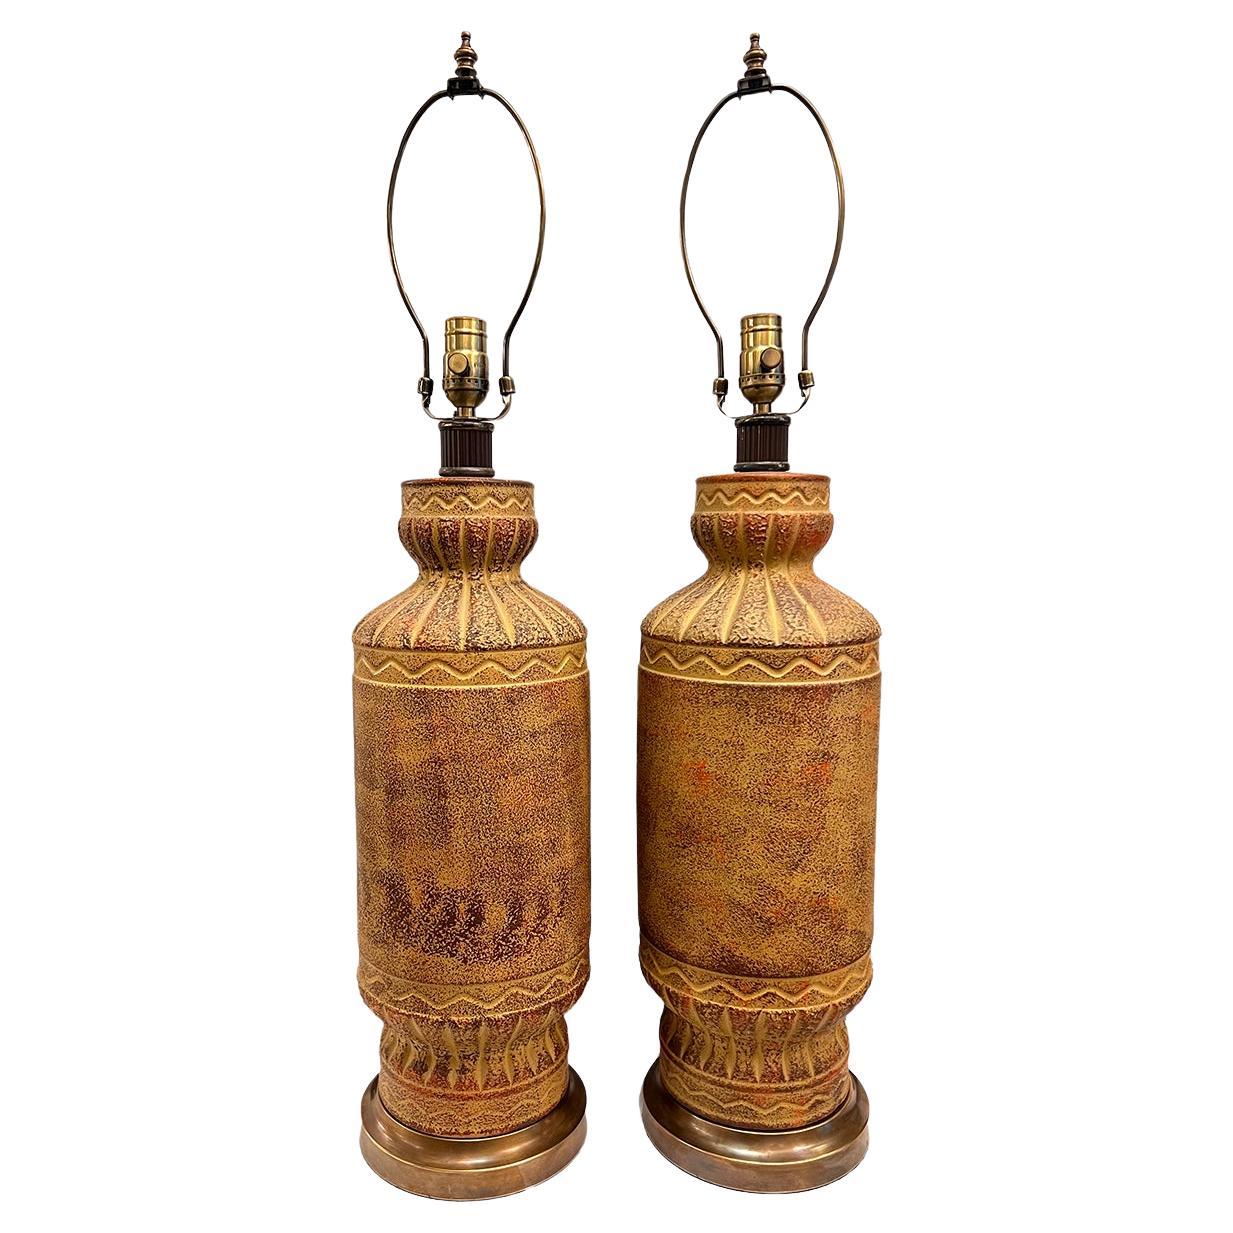 Pair of Vintage Italian Table Lamps For Sale